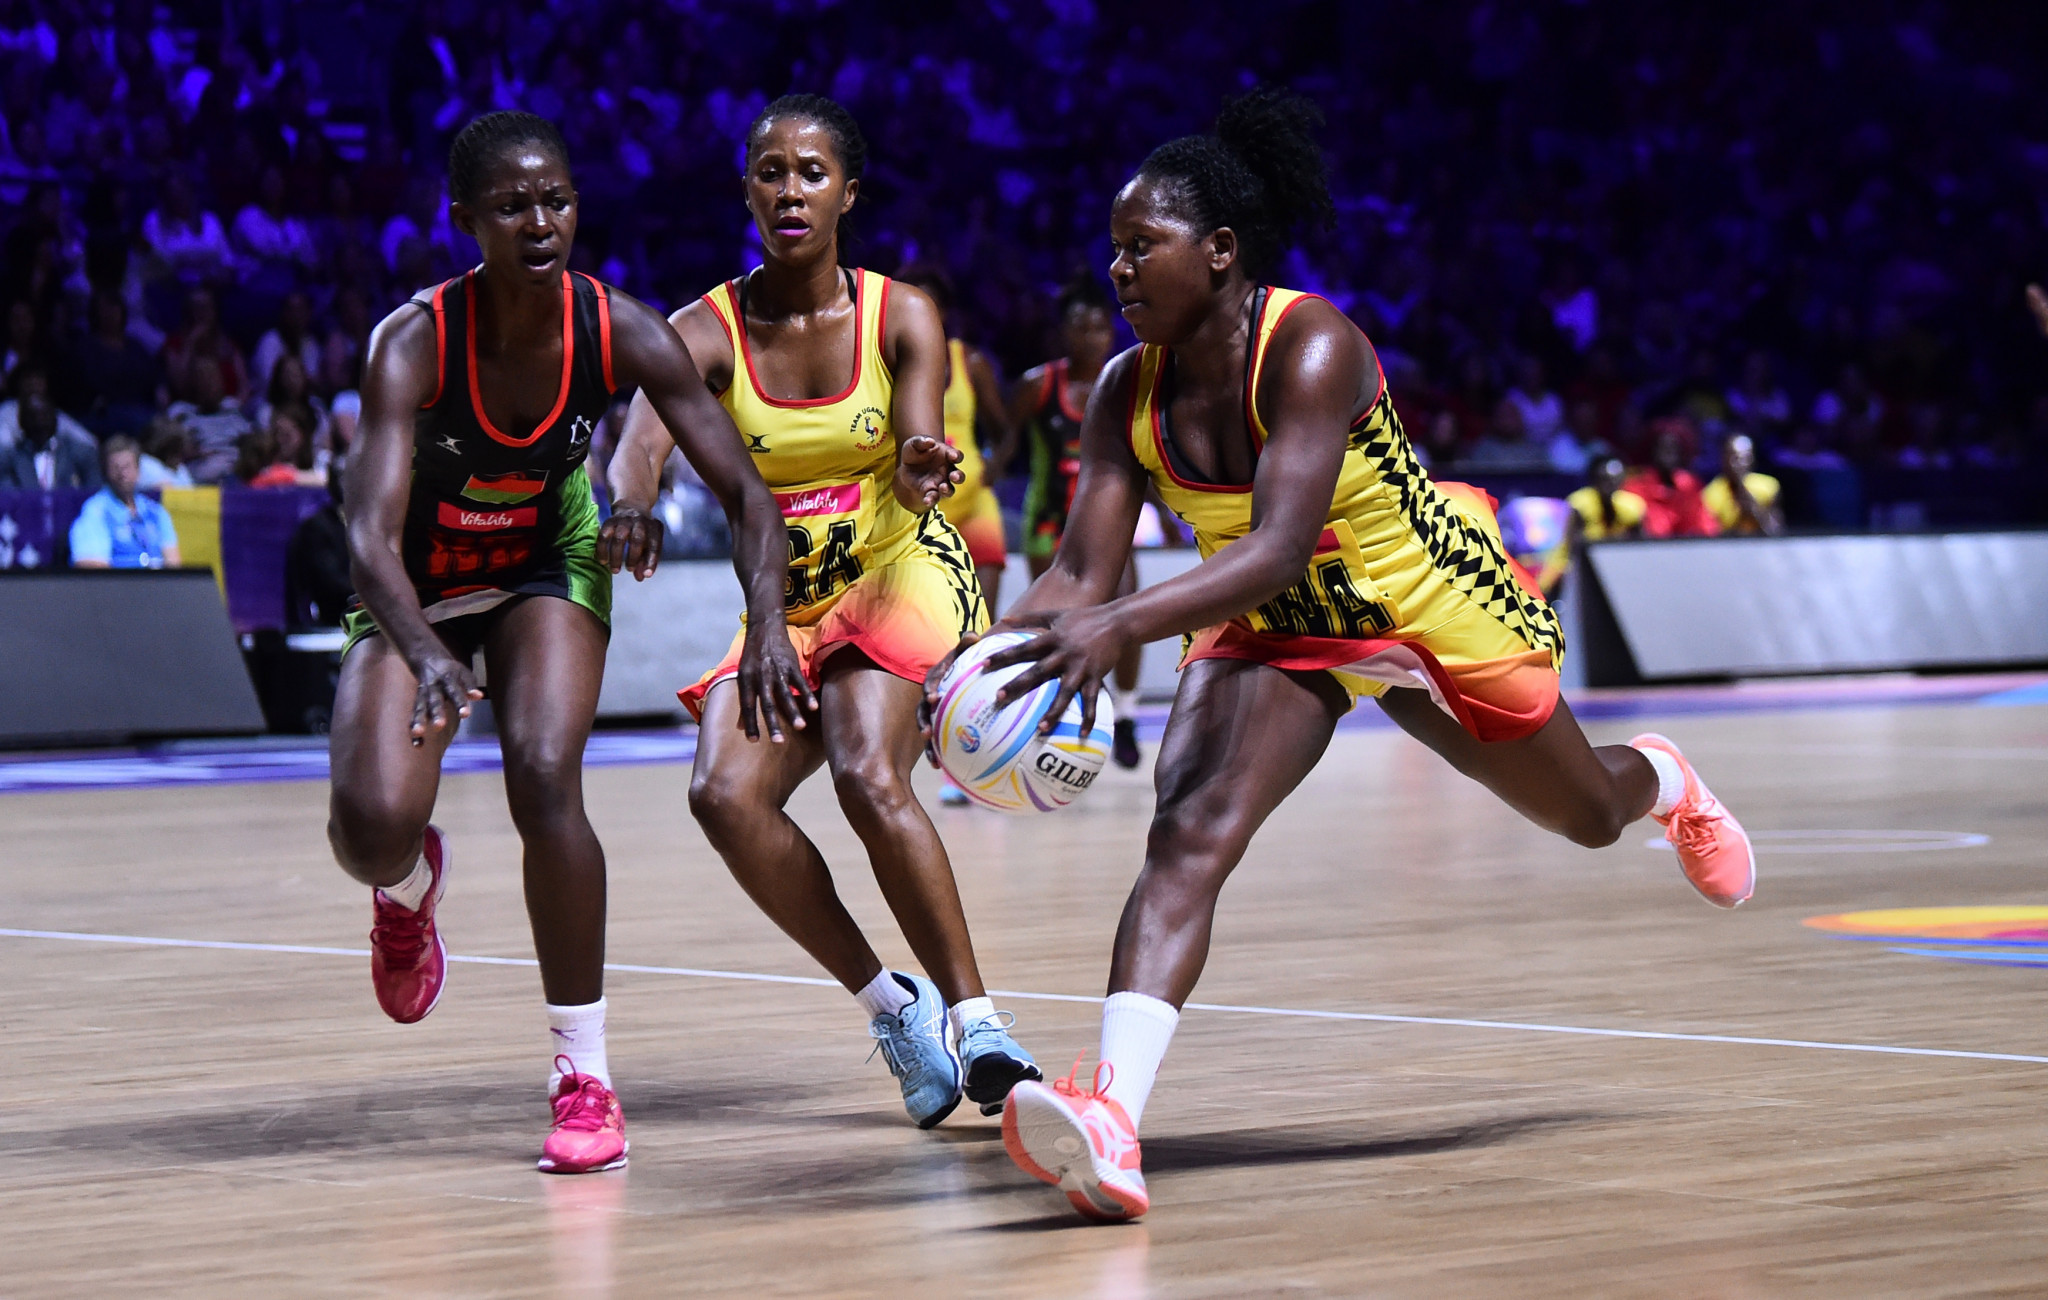 Jamaica and Malawi to meet in fifth-place playoff at Netball World Cup